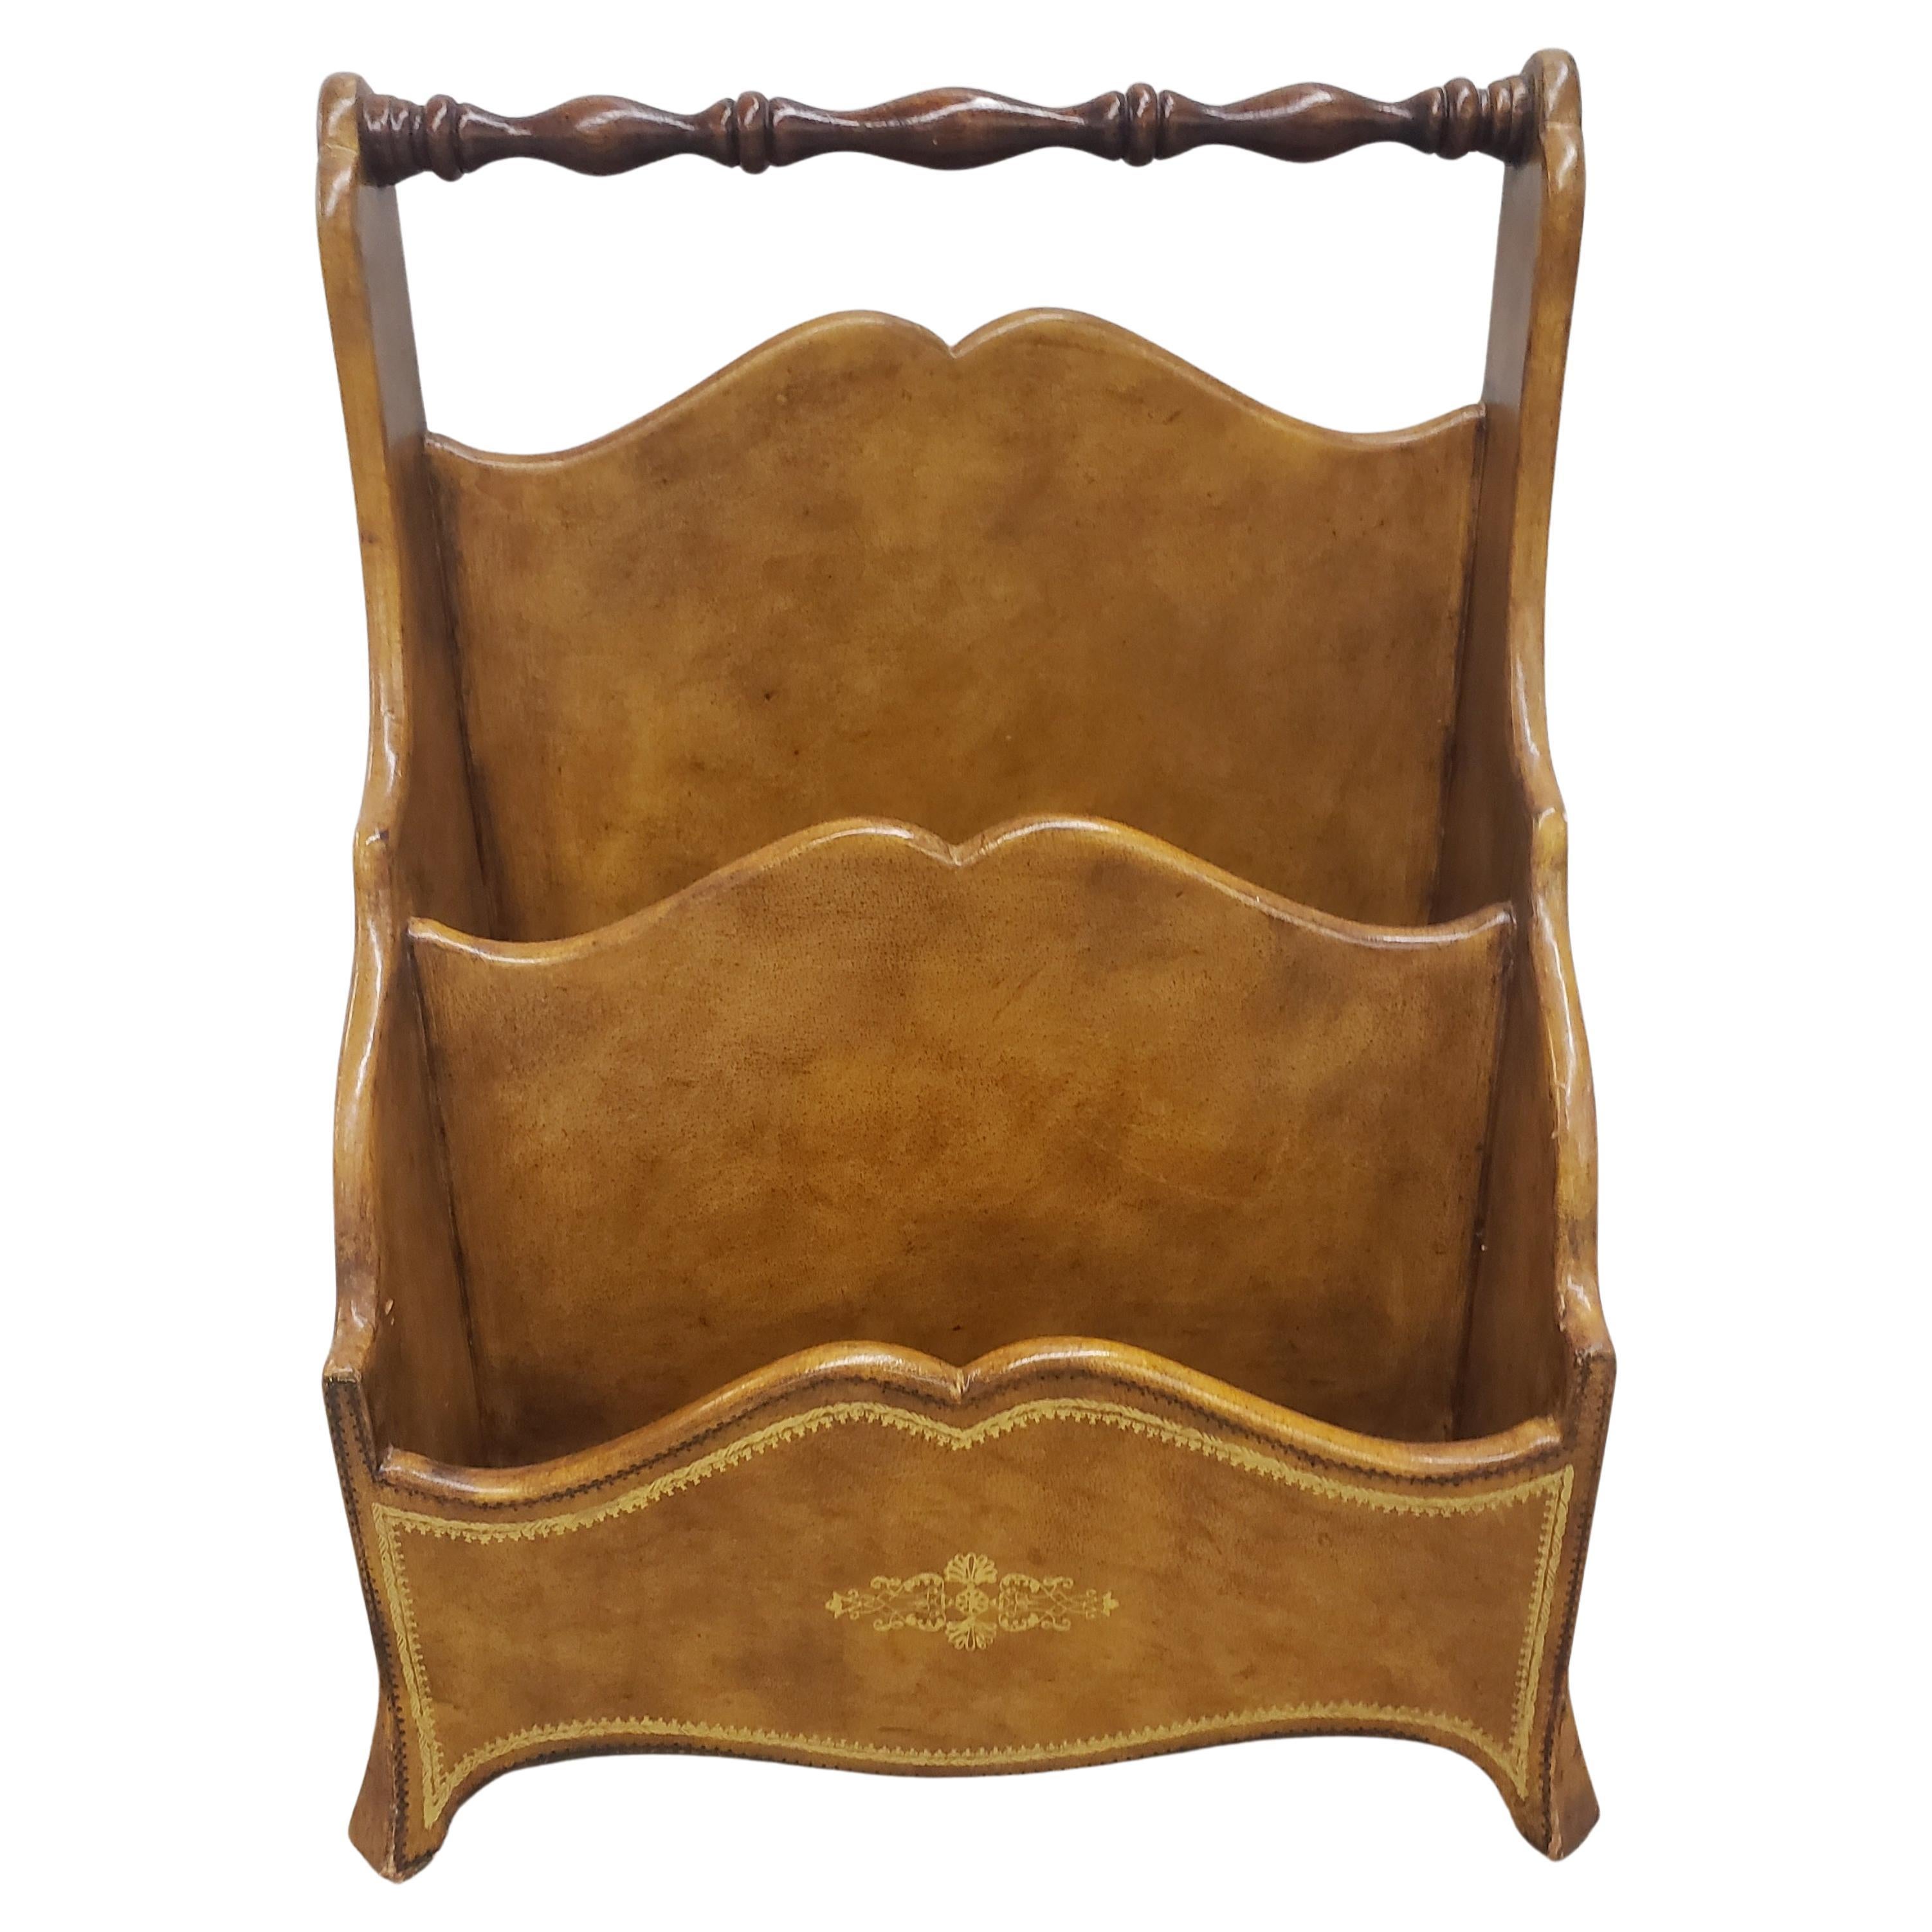 Maitland Smith Neoclassical Brown Leather Upholstered Magazine or Letter Stand For Sale